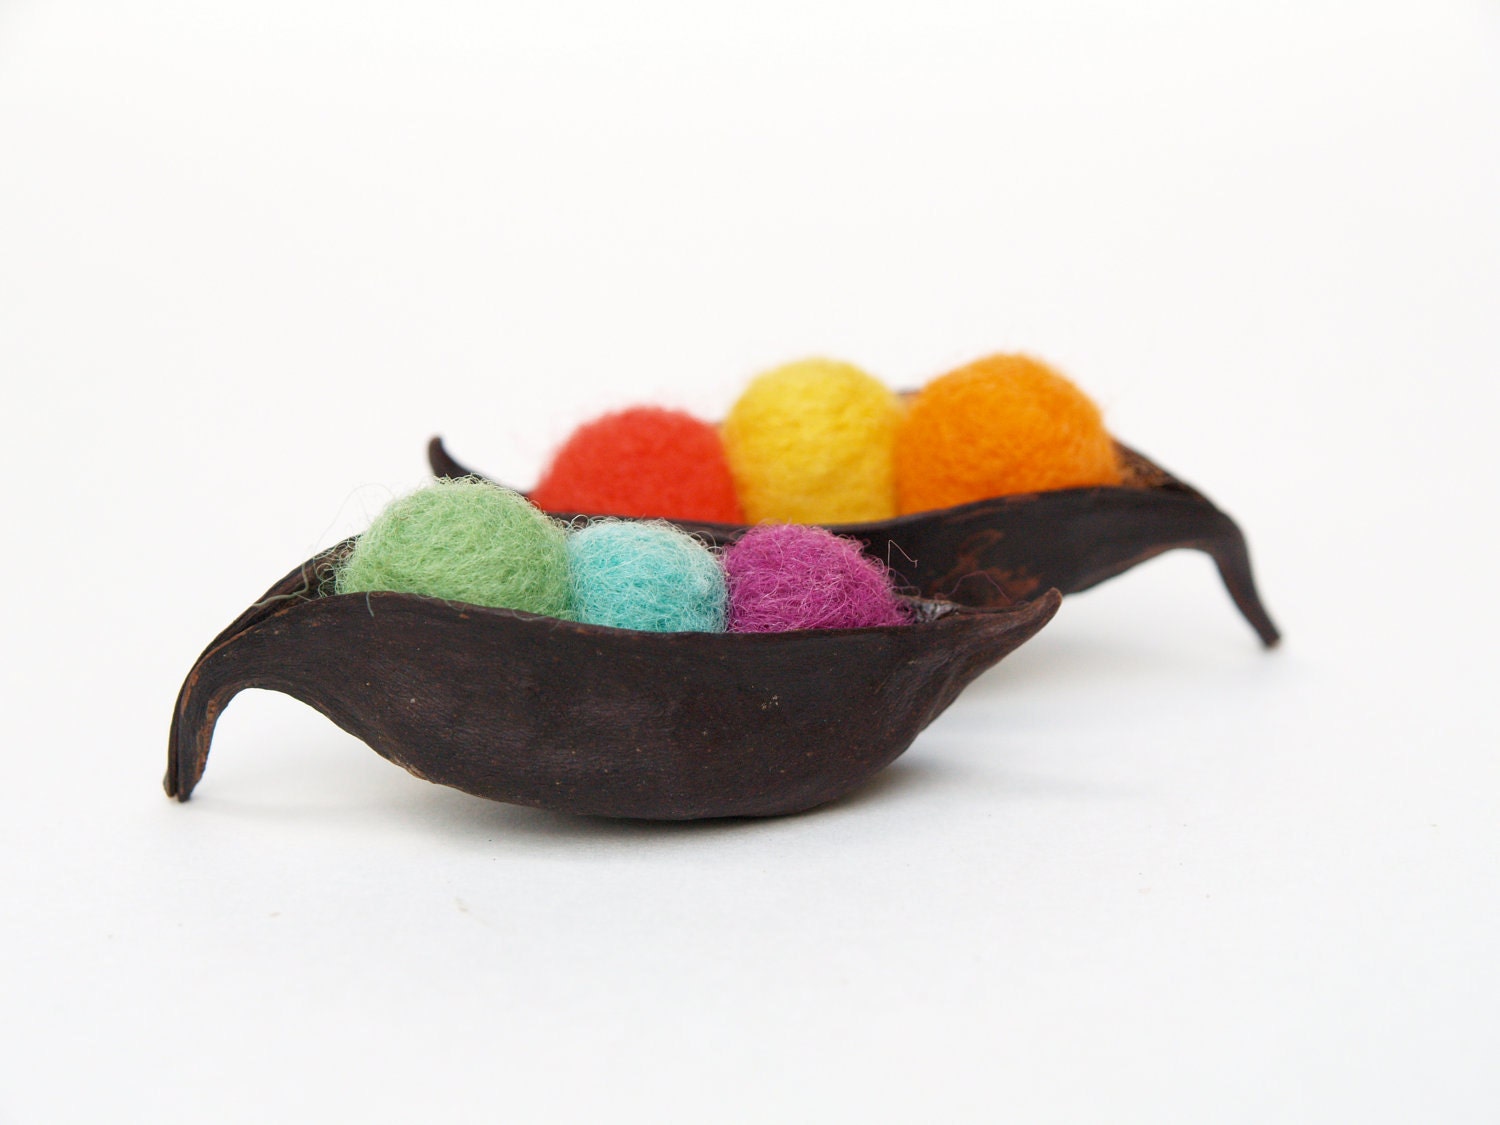 Rainbow Peas in a Pod, needle felted display, unique handmade wool garden home decor nature inspired fall autumn Christmas winter decorating